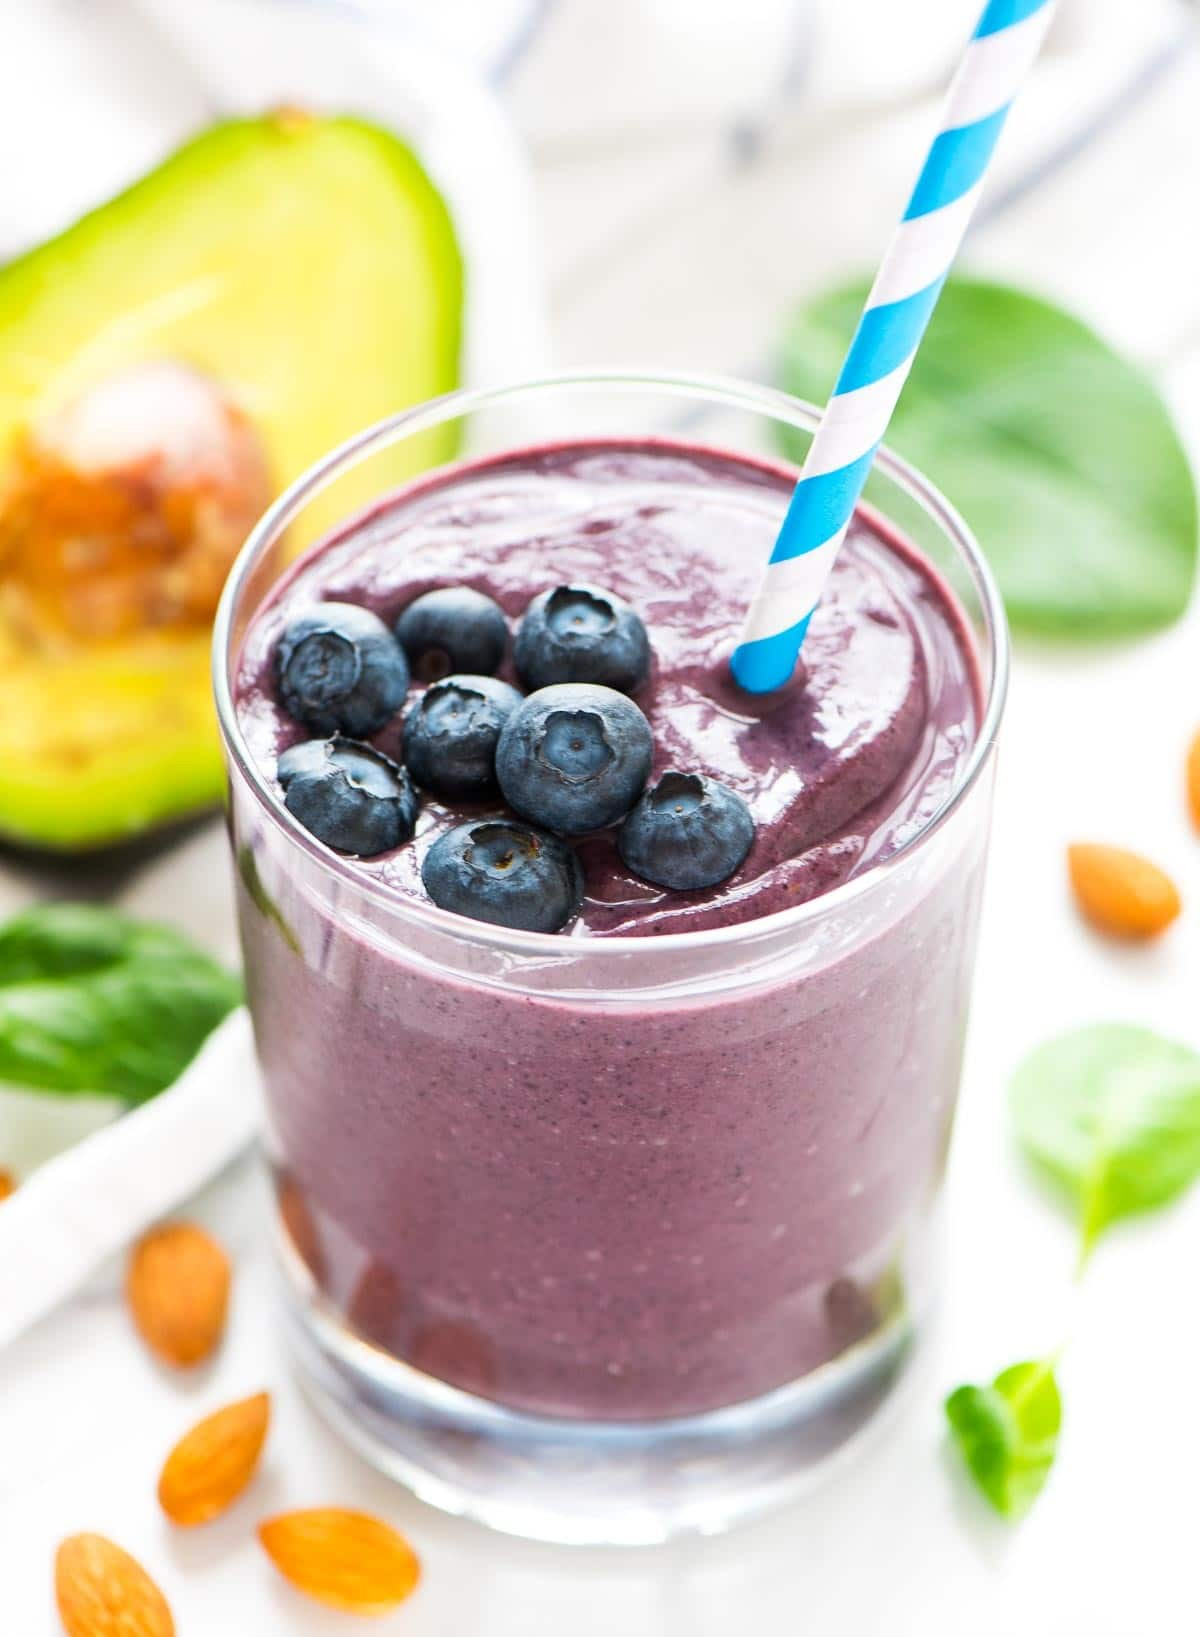 Blueberries Smoothies Healthy
 Blueberry Banana Avocado Smoothie Recipe for Glowing Skin